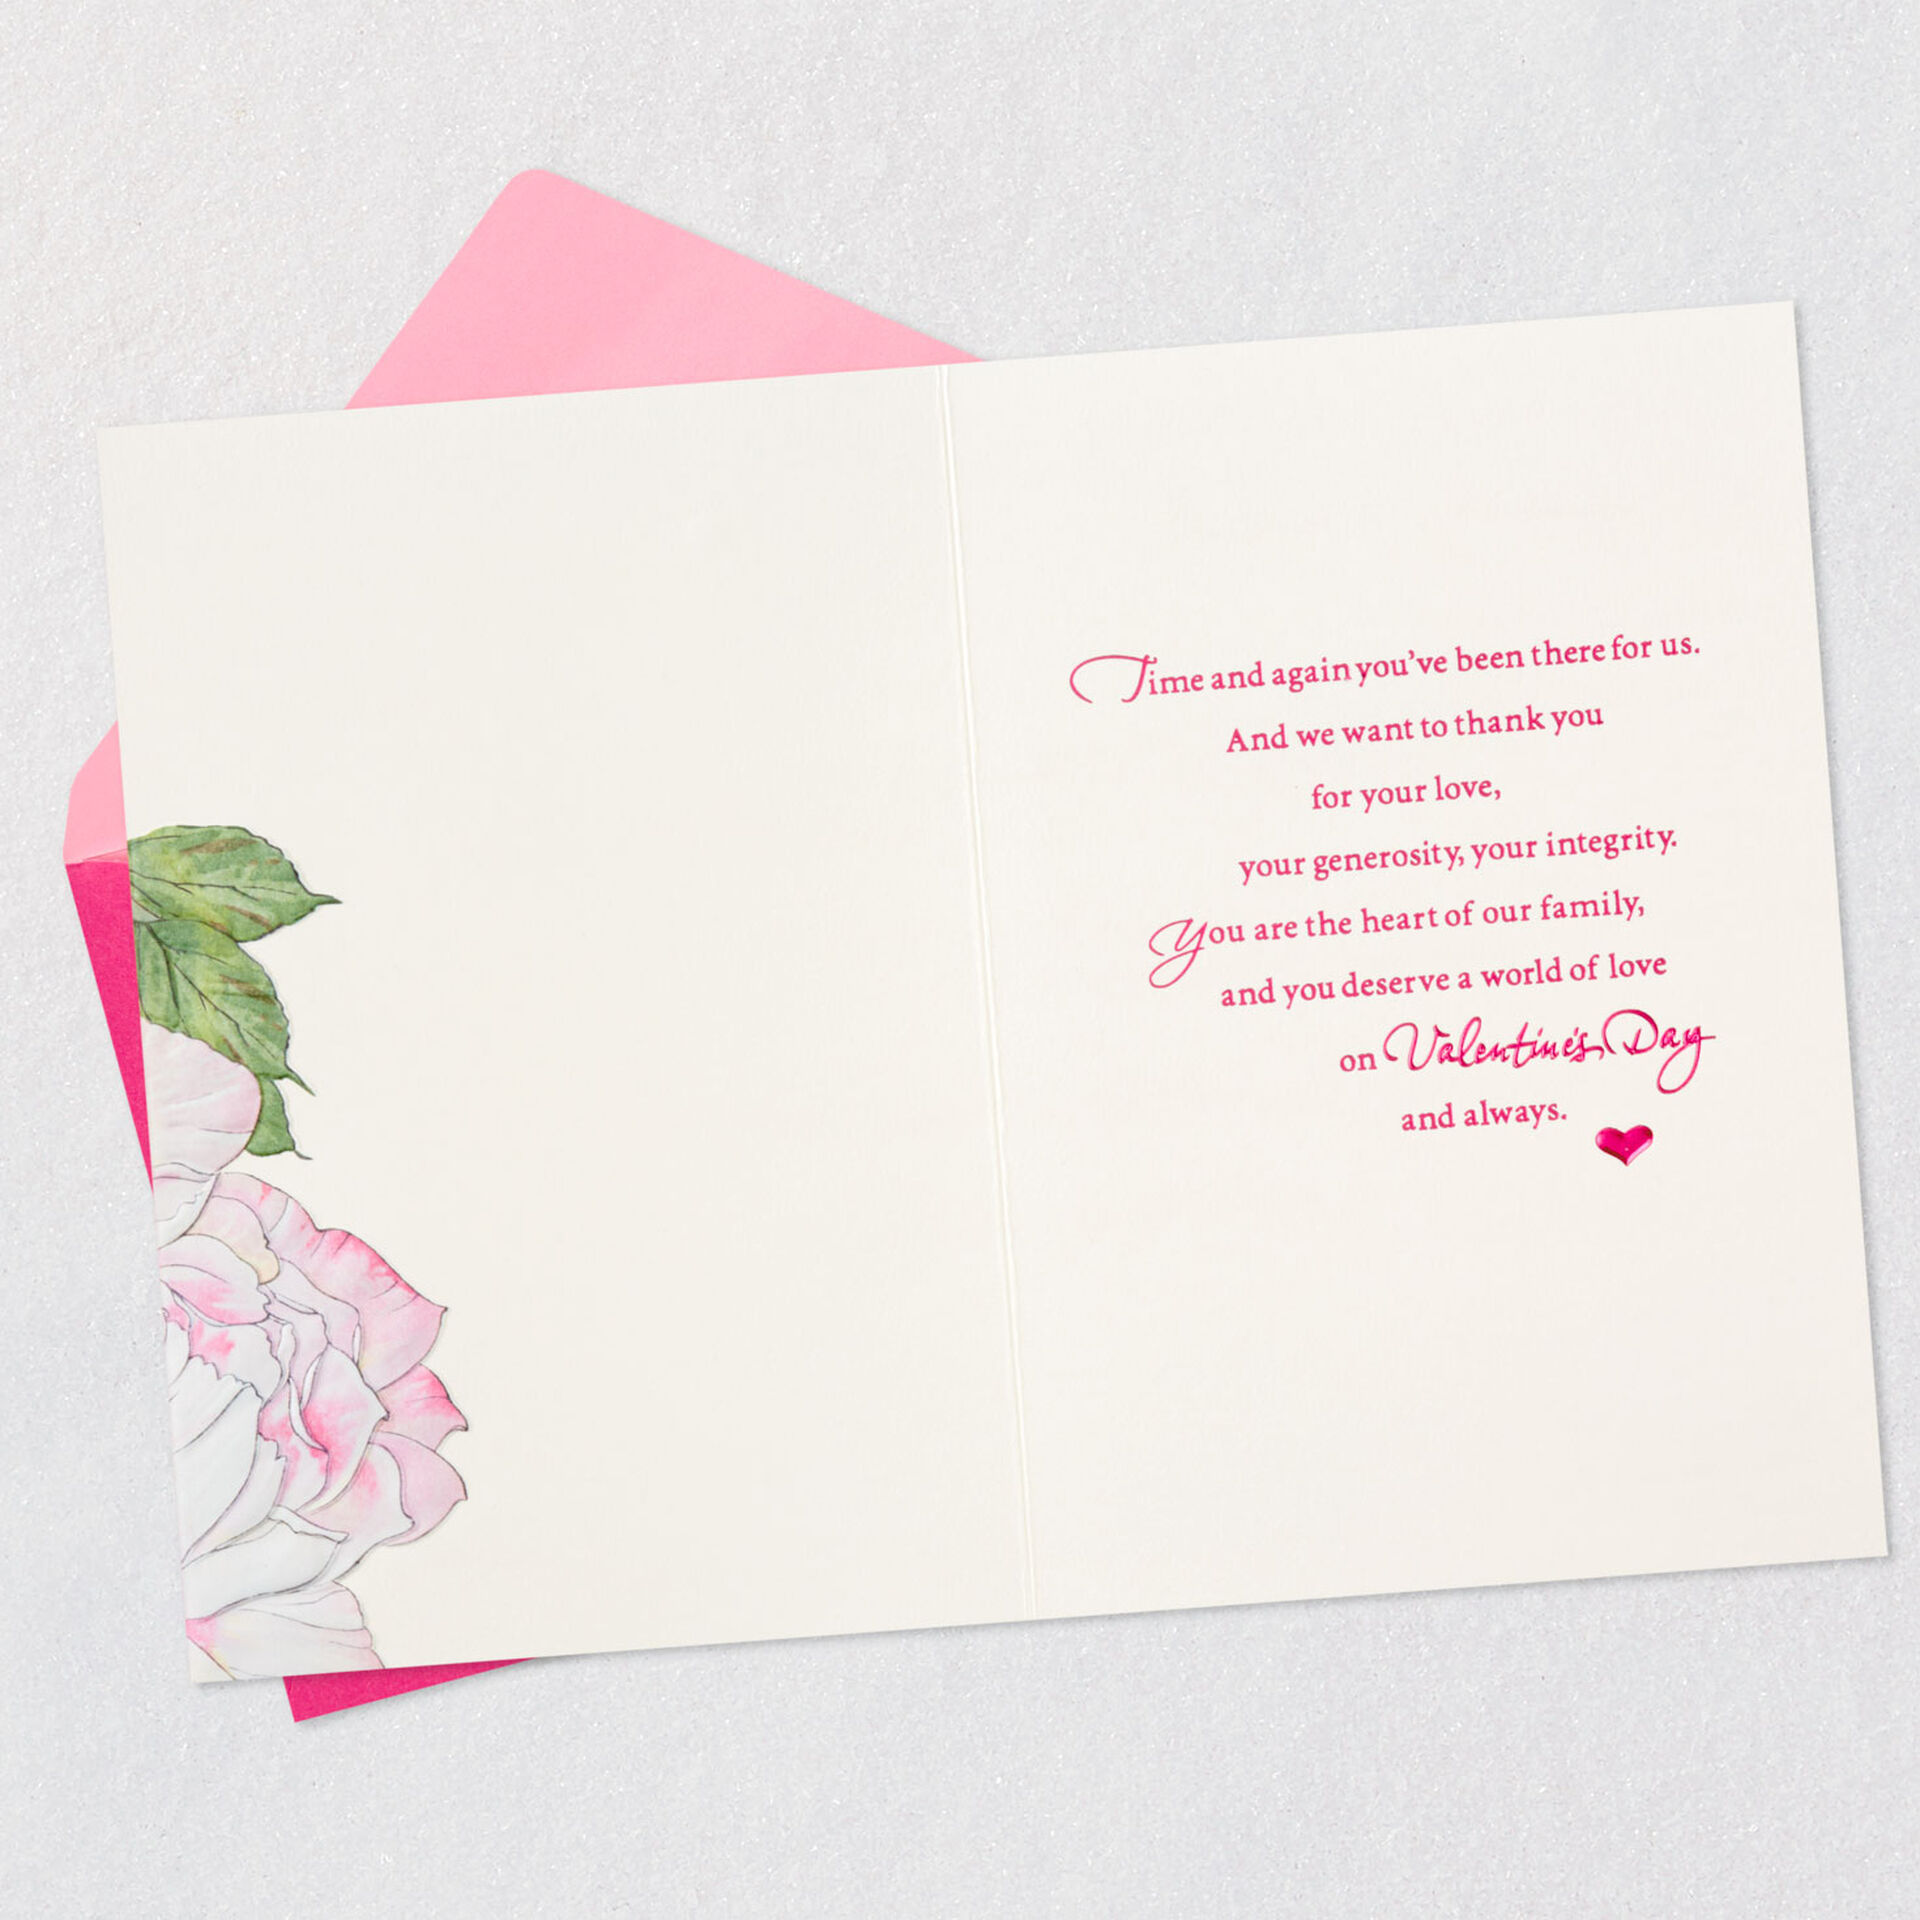 Peony-Flowers-Valentines-Day-Card-from-Both_499VEE7713_03